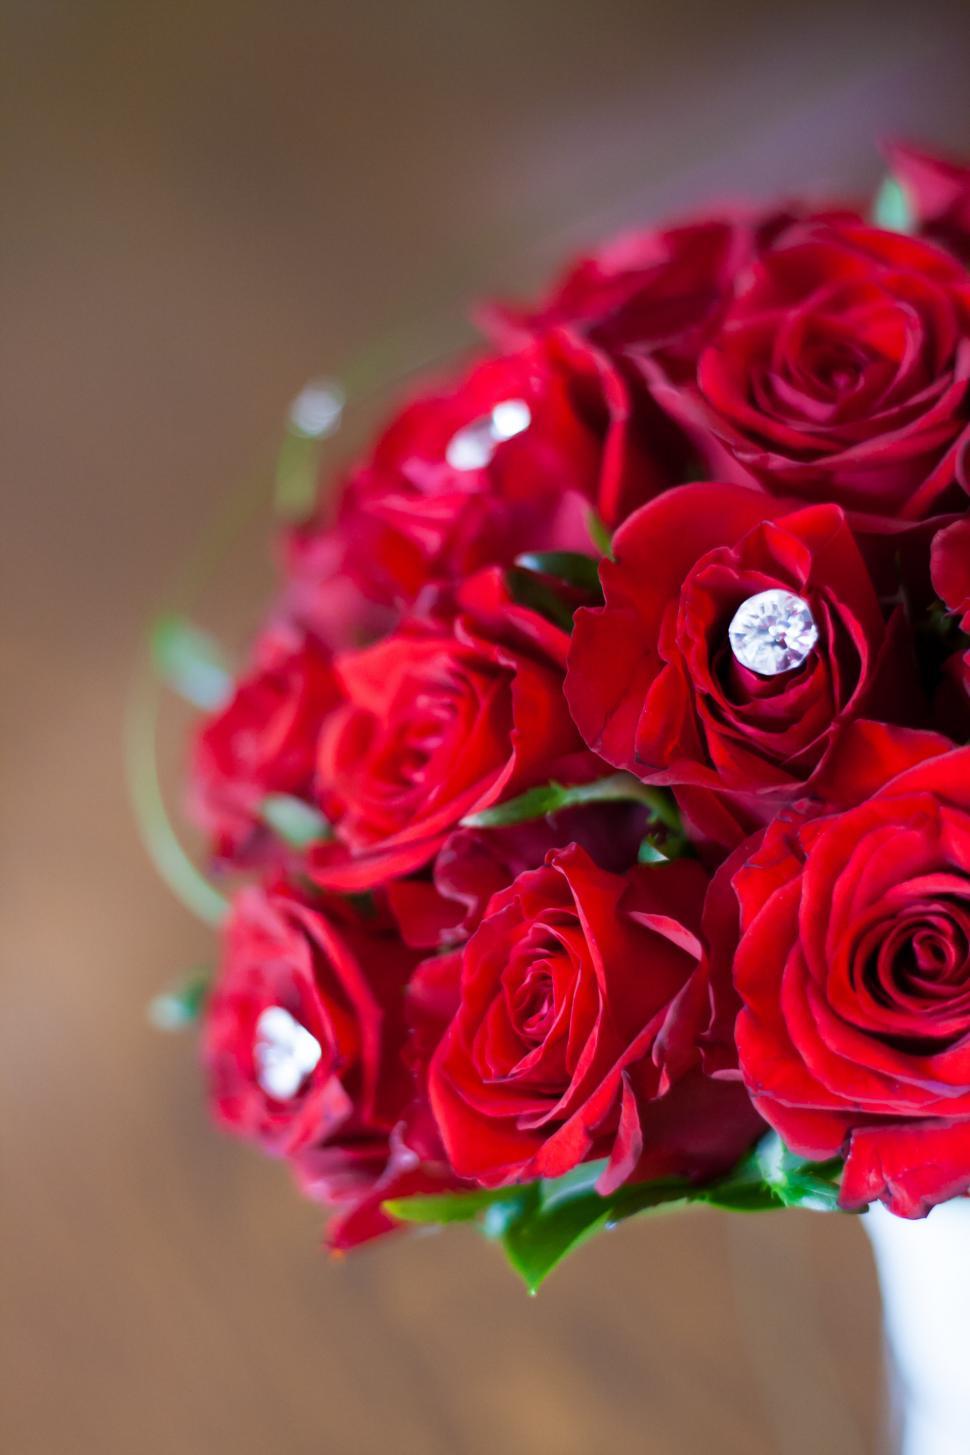 Free Image of Close Up Flower Red bouquet bridal flowers rose roses zircon bouquet flower arrangement arrangement decoration rose flower flowers floral pink roses wedding petal blossom love bloom bunch vase 